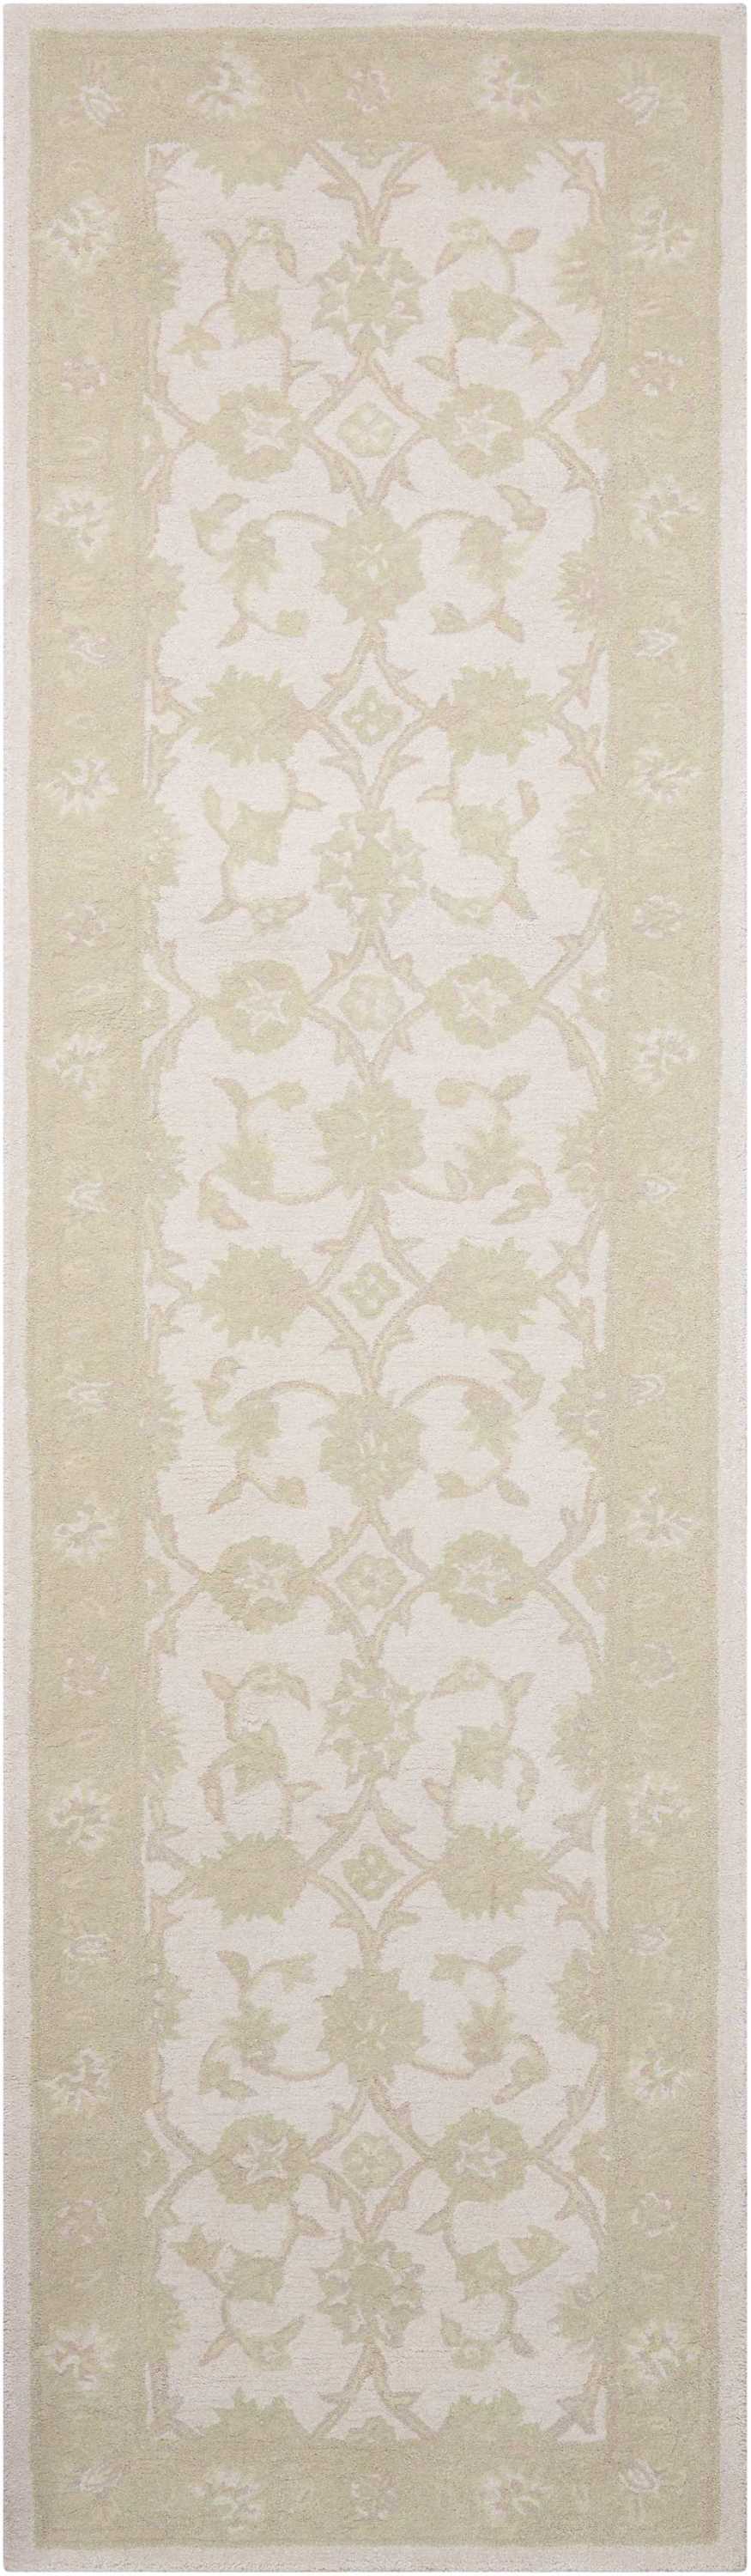 Nourison Home Zephyr ZEP01 Ivory Green Traditional Tufted Rug